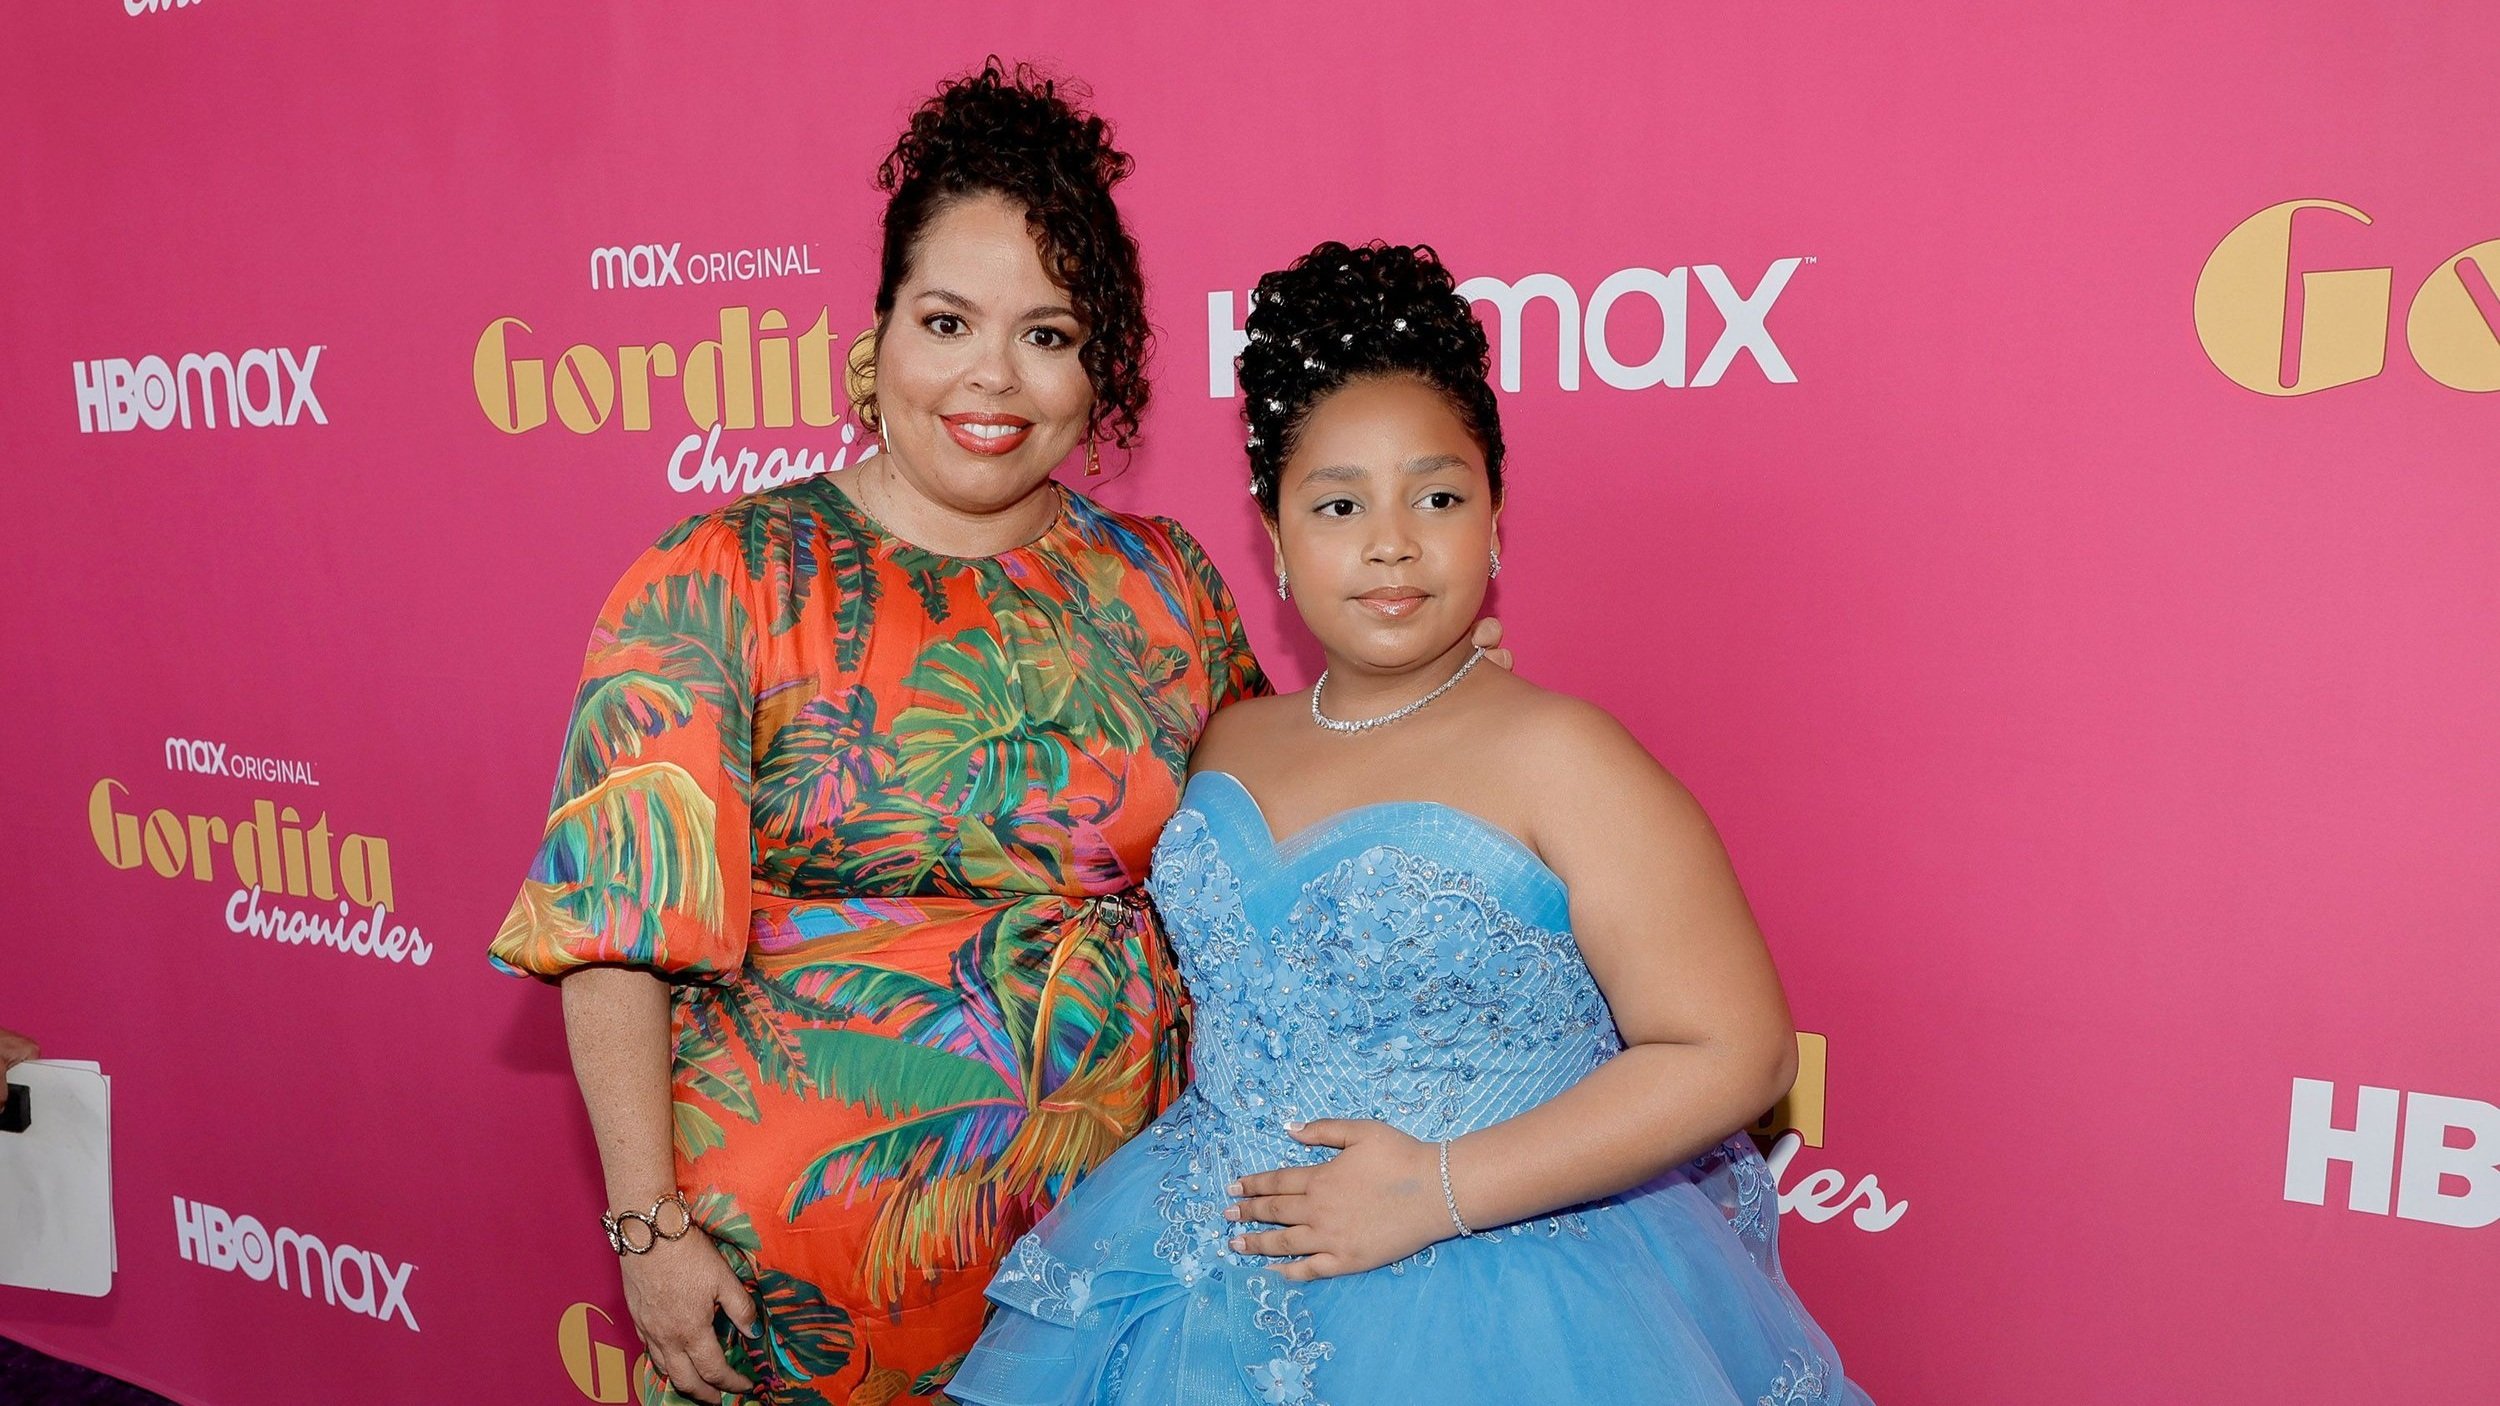 HBO Max's 'Gordita Chronicles' Showrunner Says Show's Cancellation